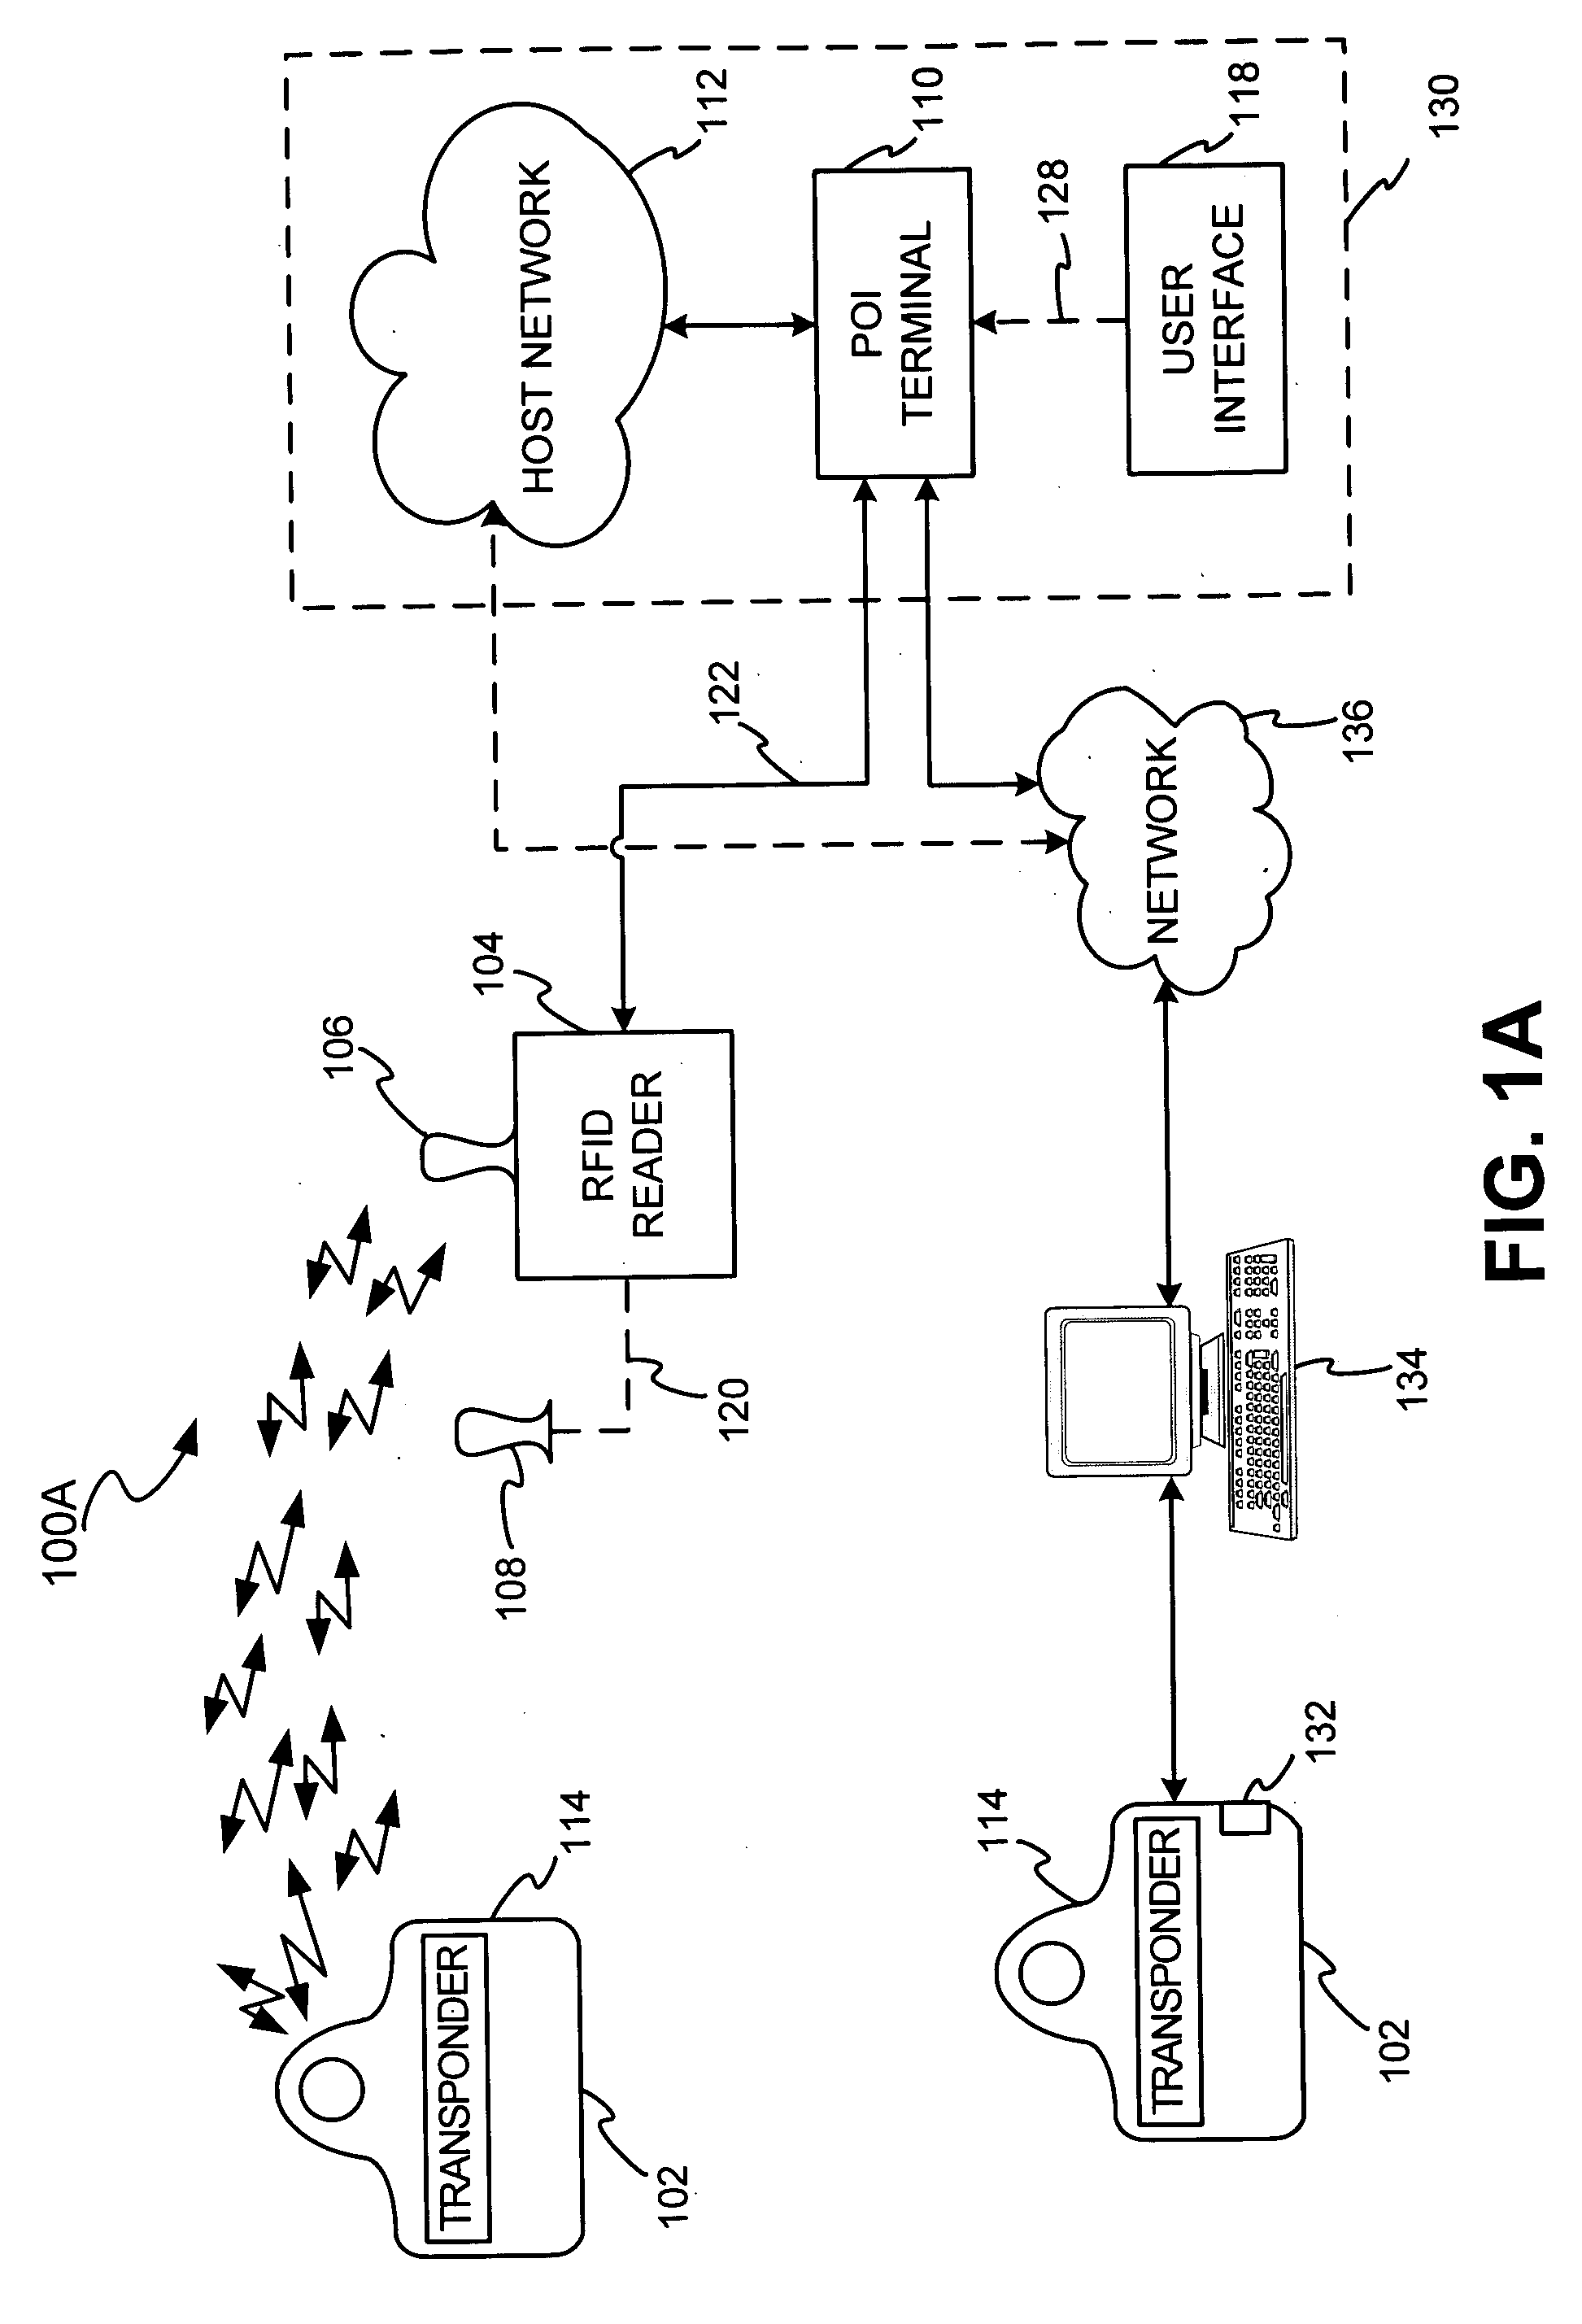 Method and system for facilitating a shopping experience